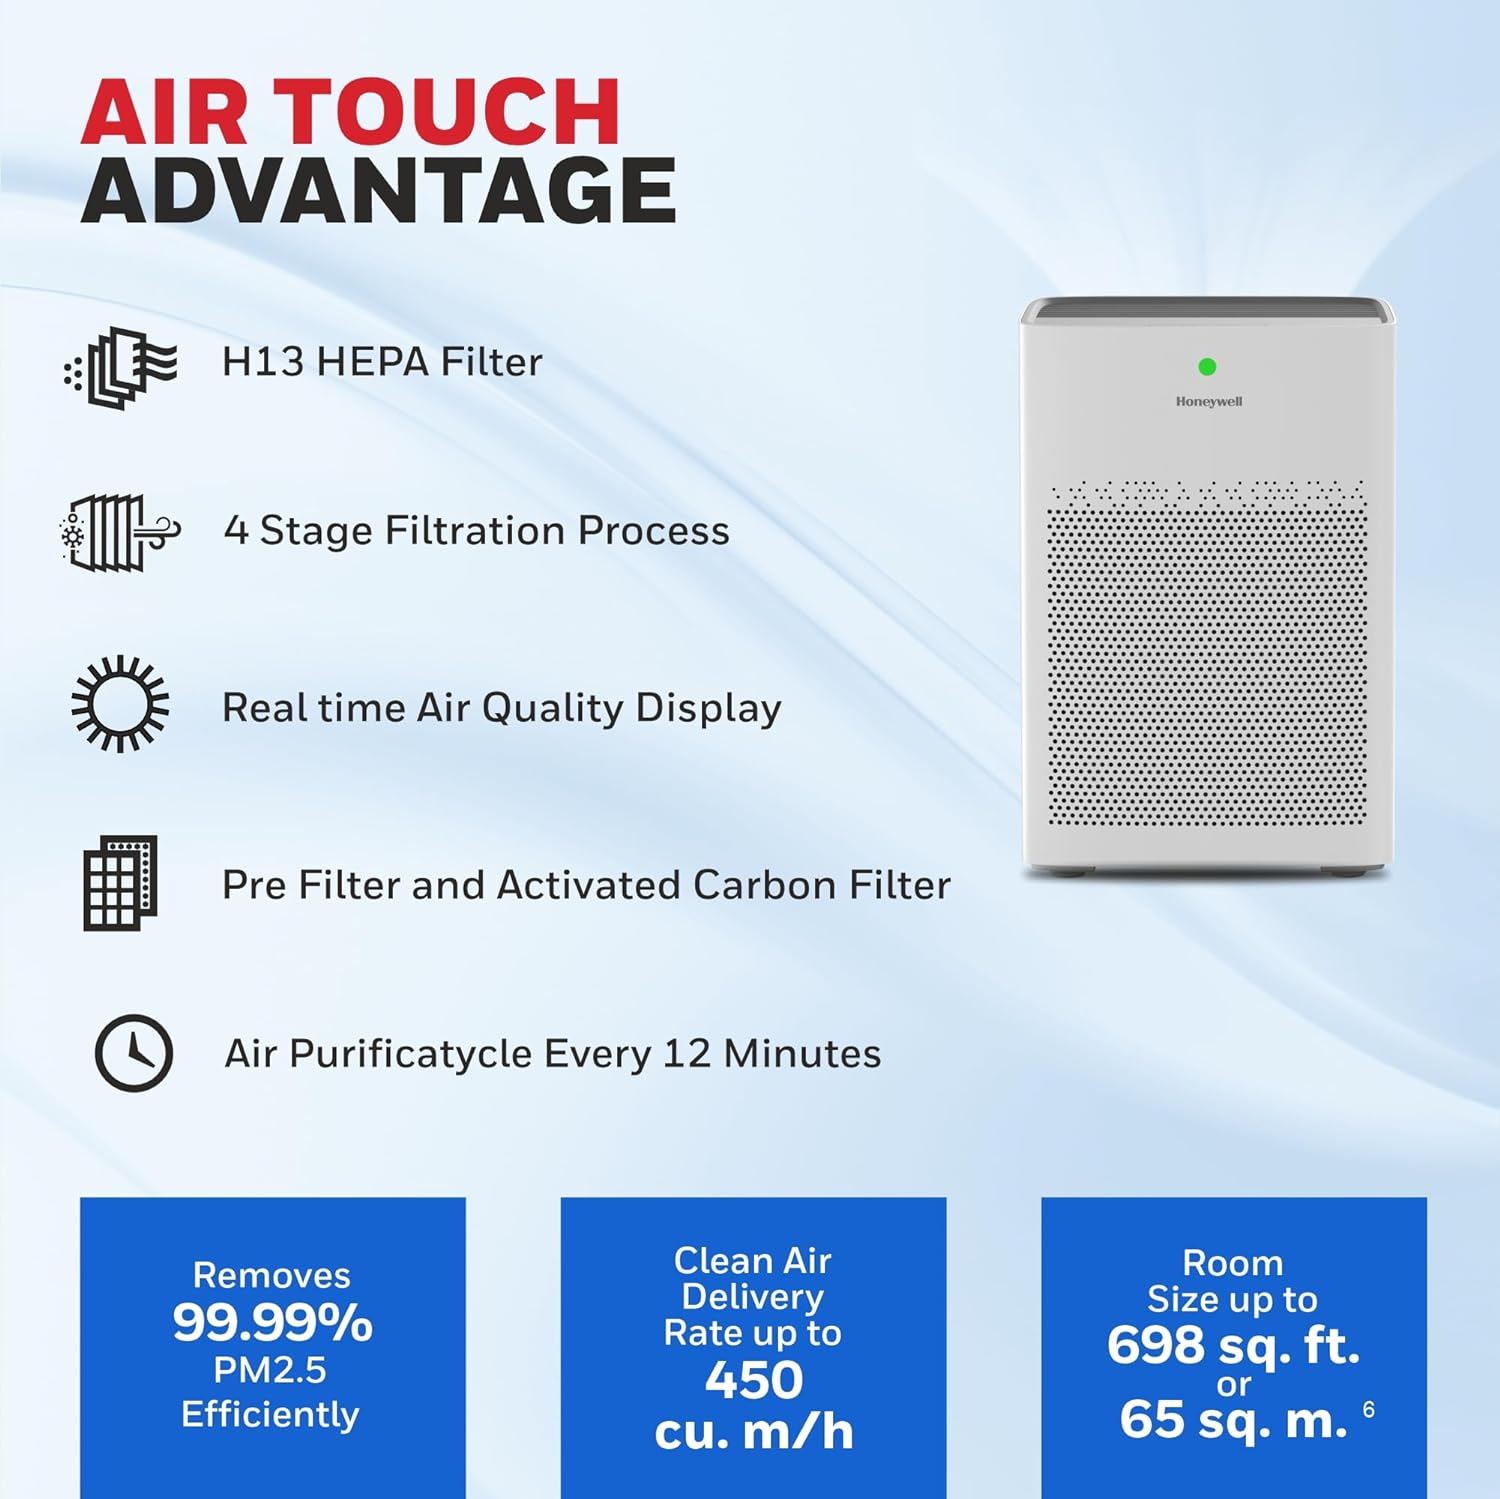 Honeywell Air touch P1 Indoor Air Purifier. Pre Filter, H13 HEPA Filter, Activated Carbon Filter, Removes 99.99% Pollutants & Micro Allergens, 3 Stage Filtration, Coverage Area of 698 sq.ft - Mahajan Electronics Online